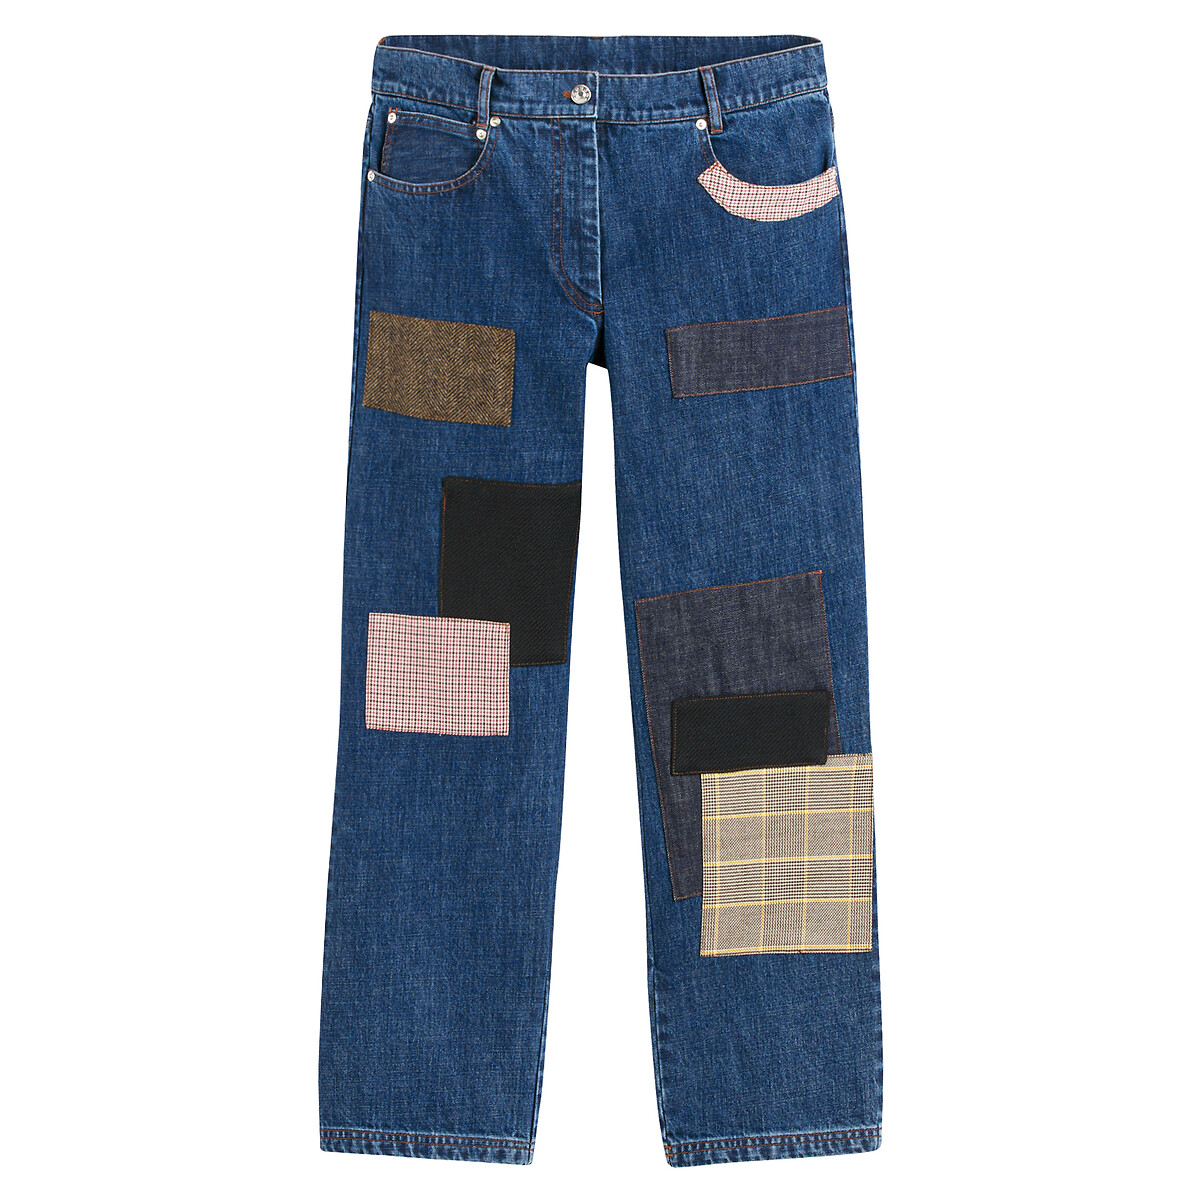 Patchwork Straight Jeans, Length 28.5"